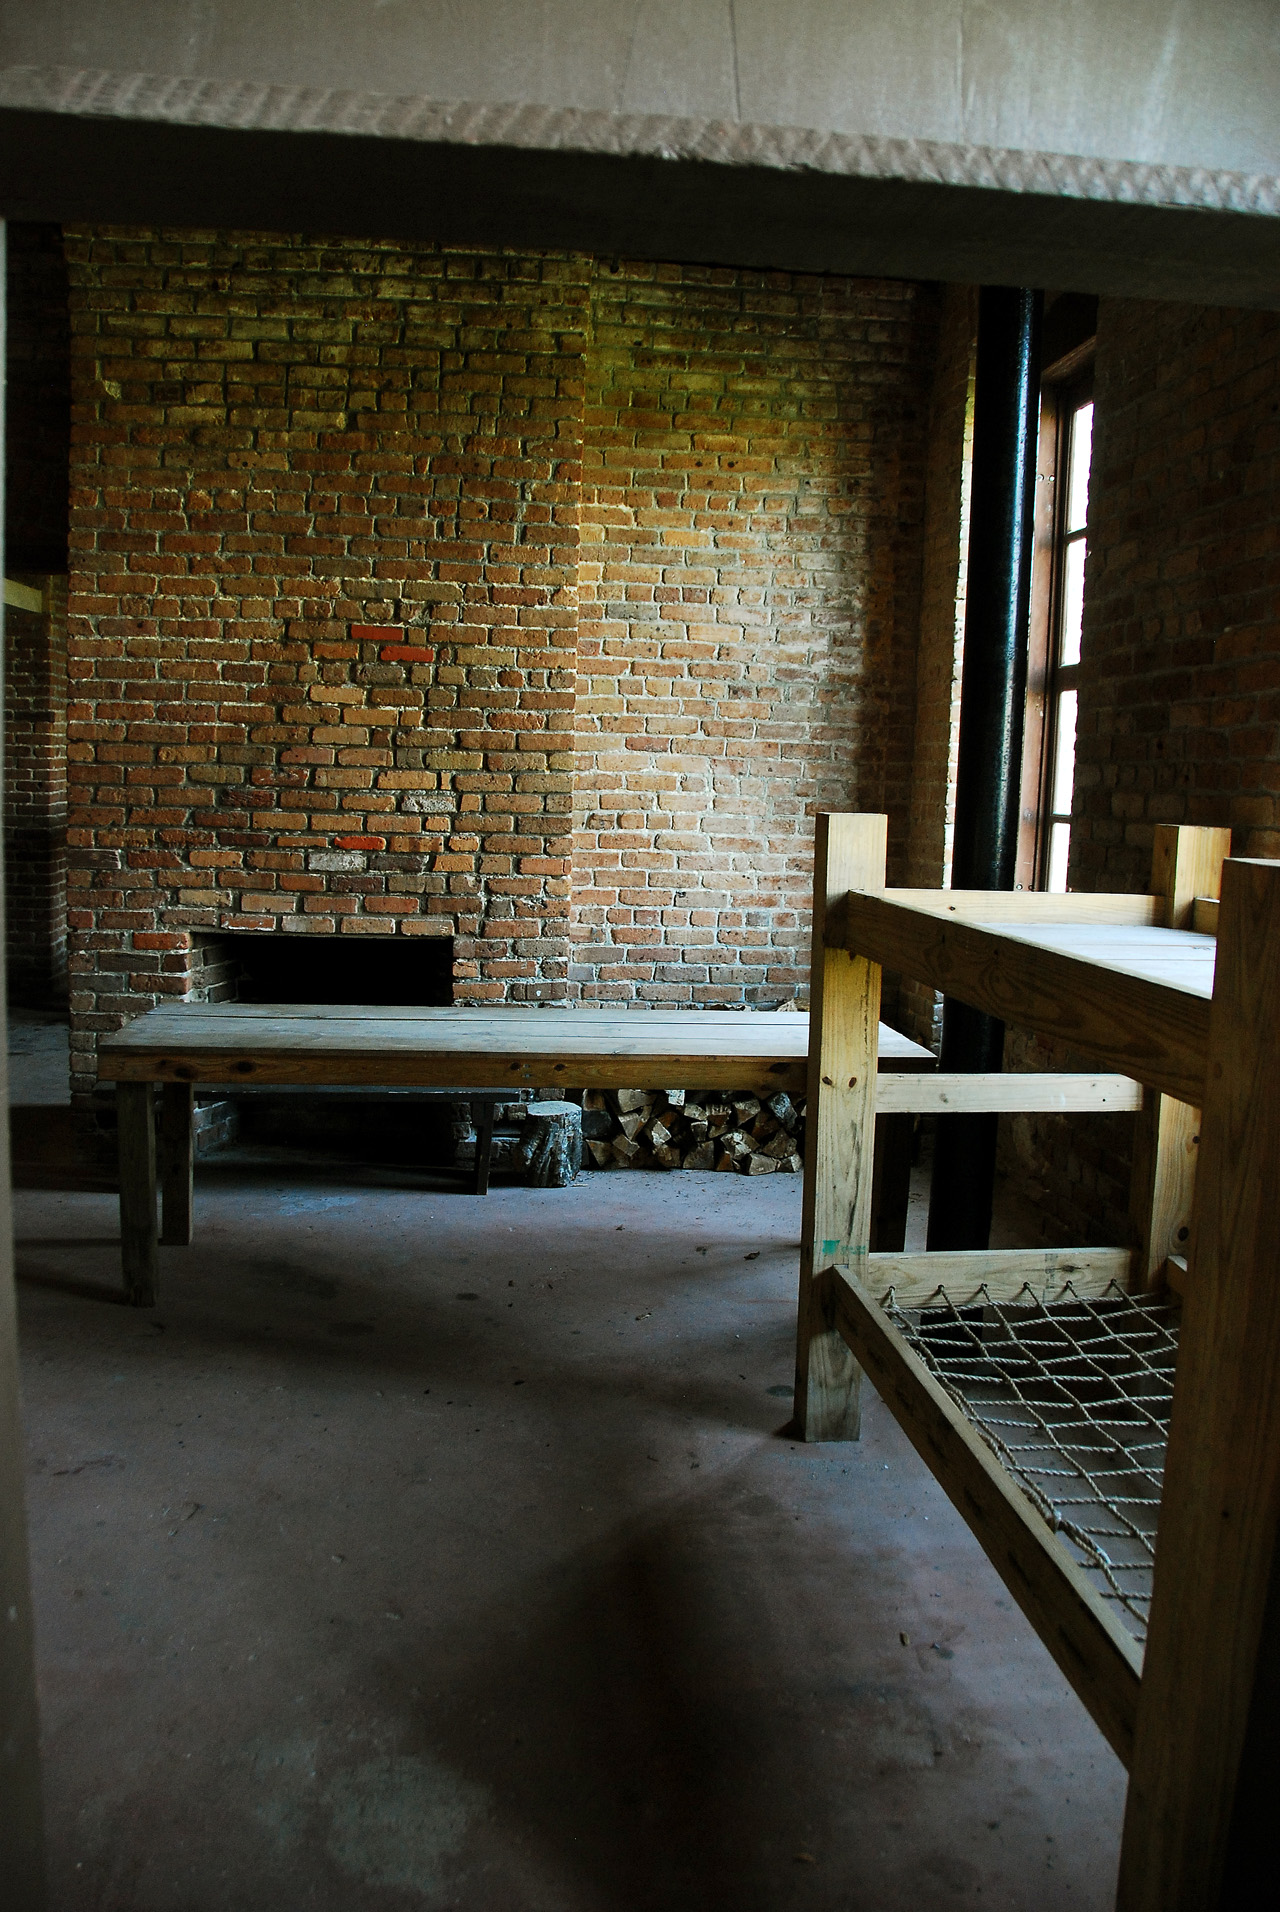 2012-01-31, 046, Fort Gaines